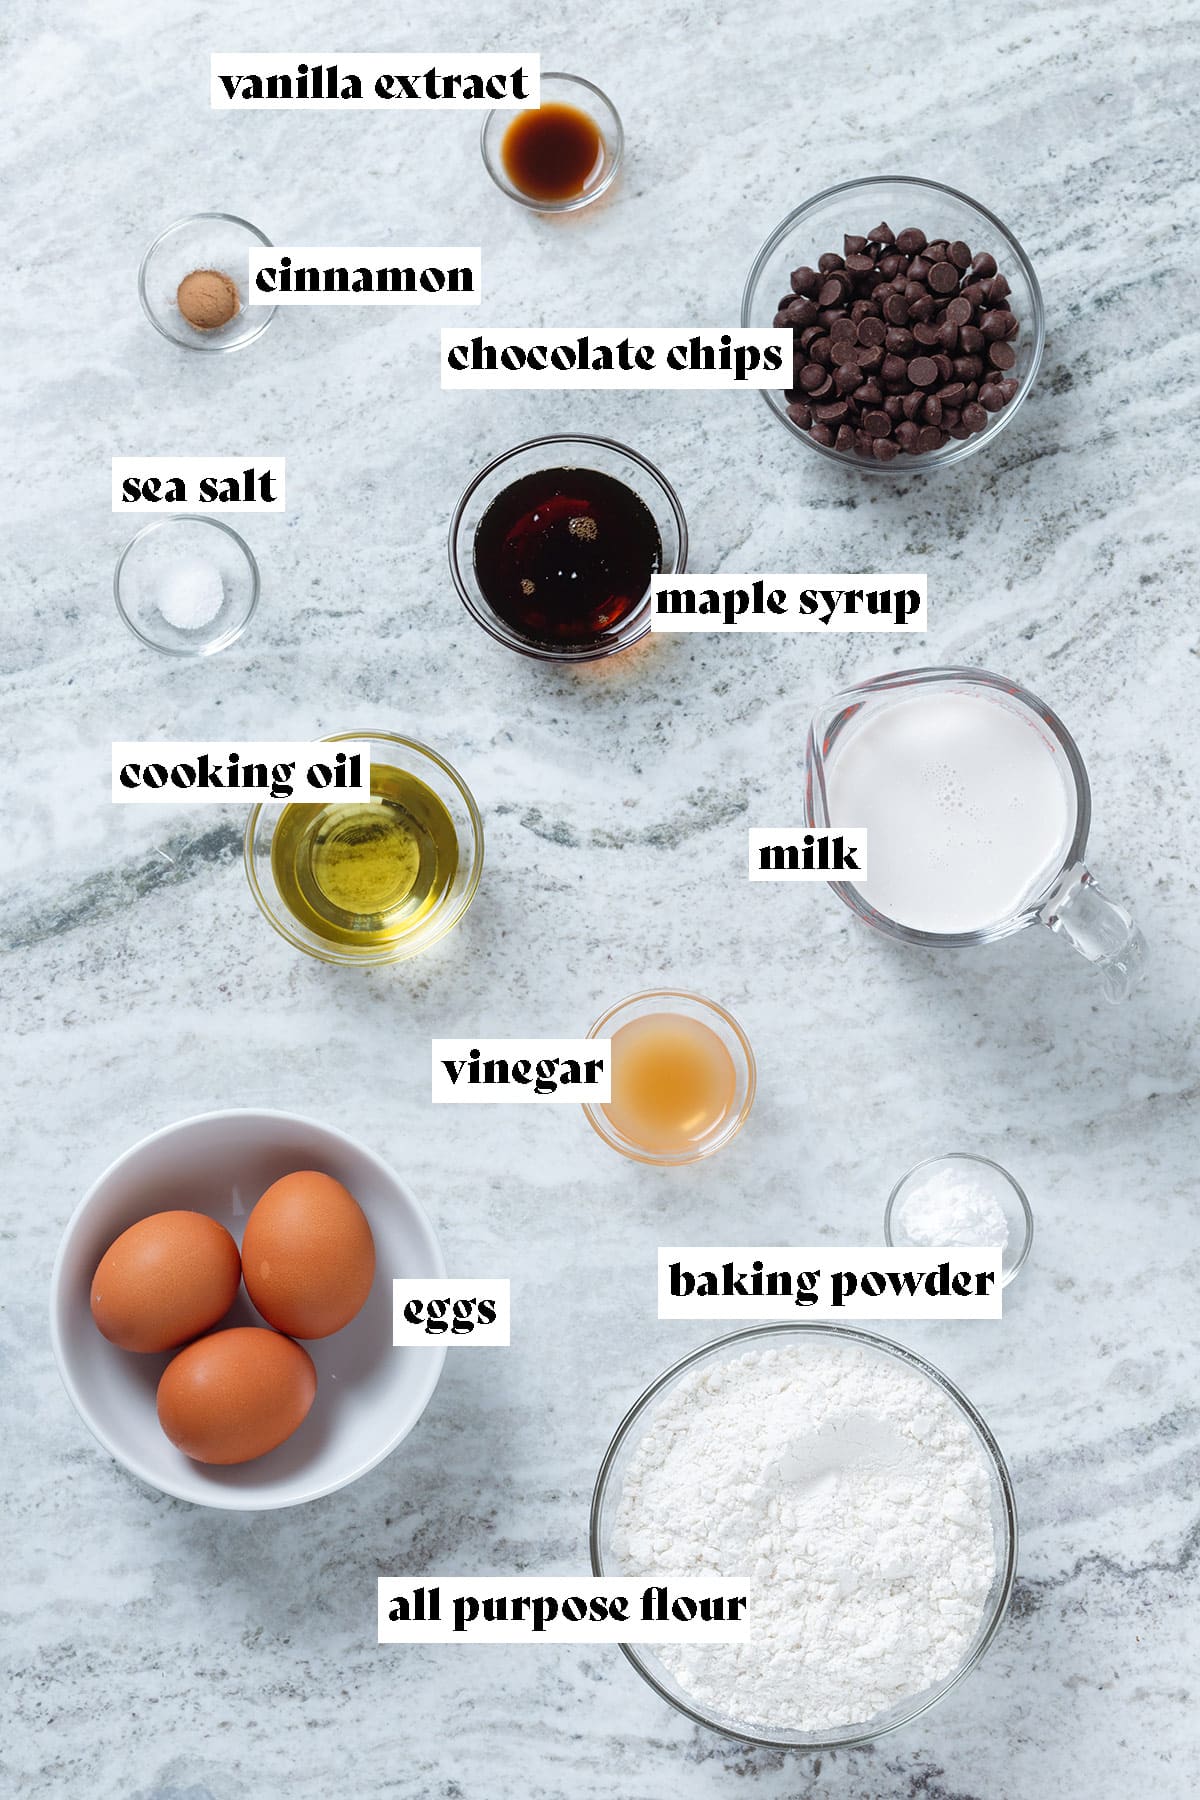 Ingredients for chocolate chip waffles like flour, eggs, milk, and chocolate chips laid out on a grey stone background with text overlay.